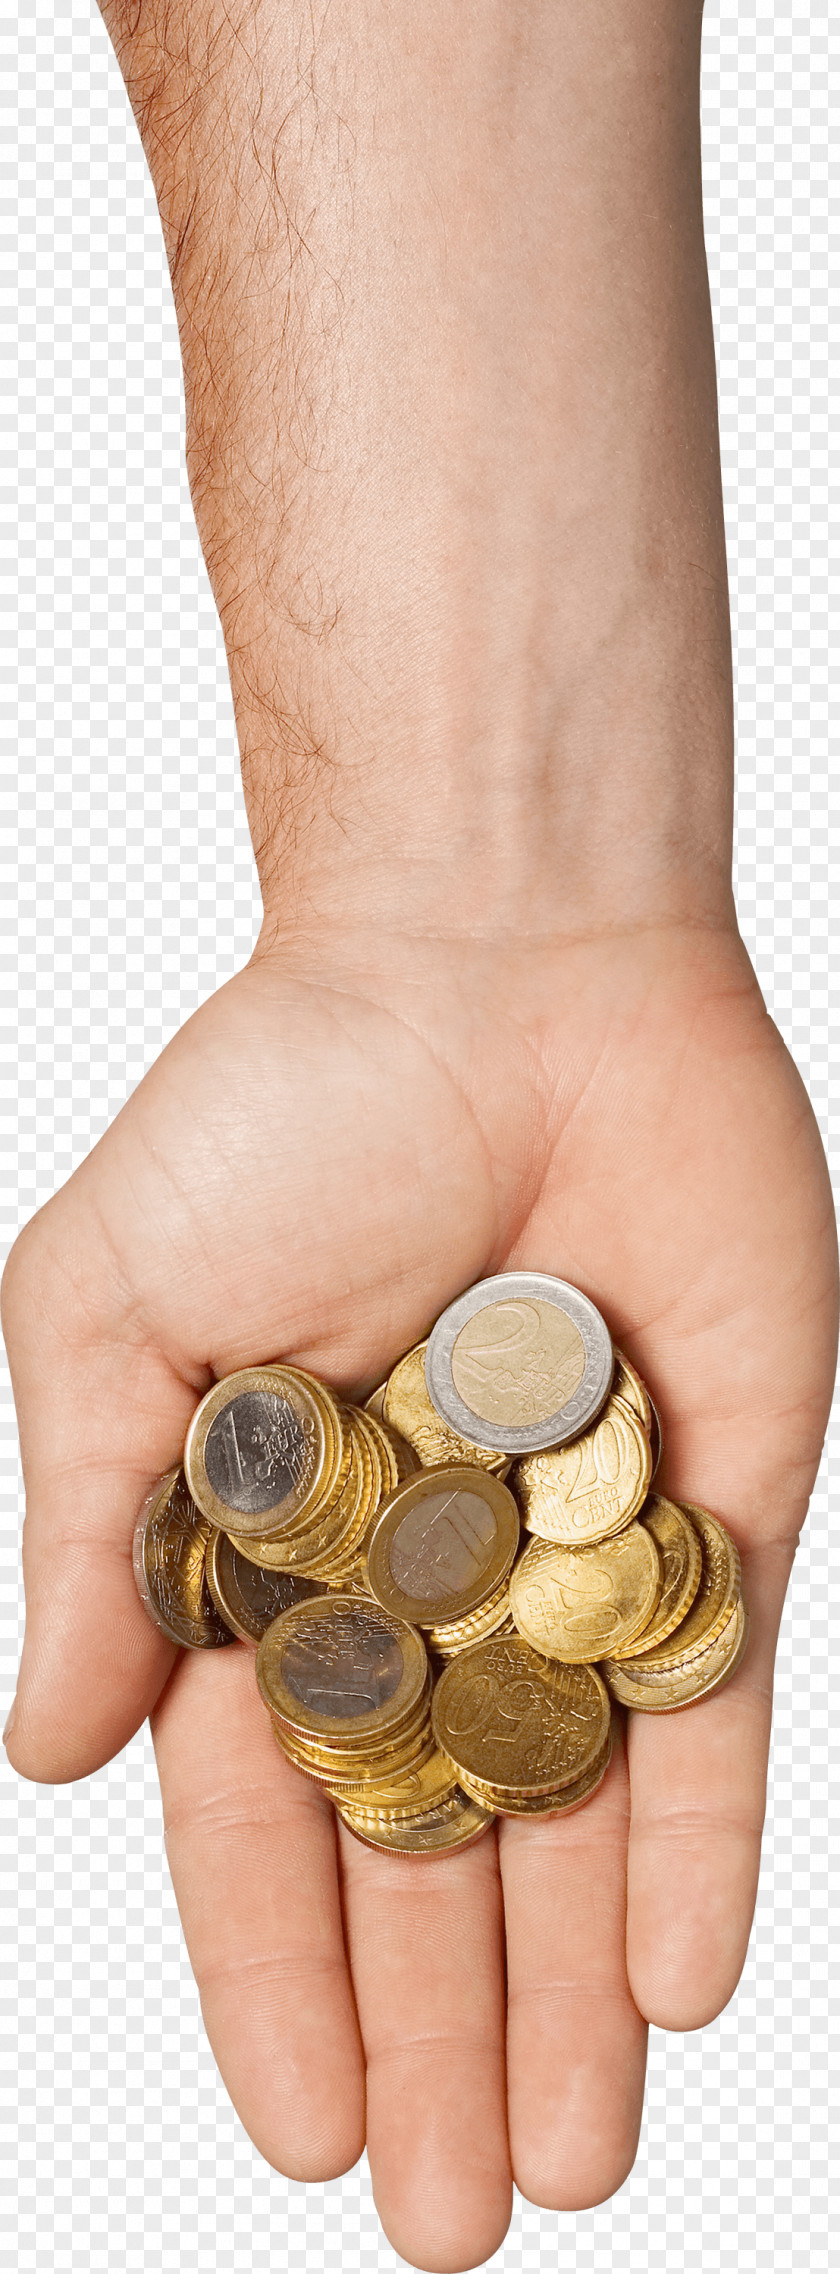 Hand Holding Coins PNG Coins, man holding round gold-colored coins clipart PNG